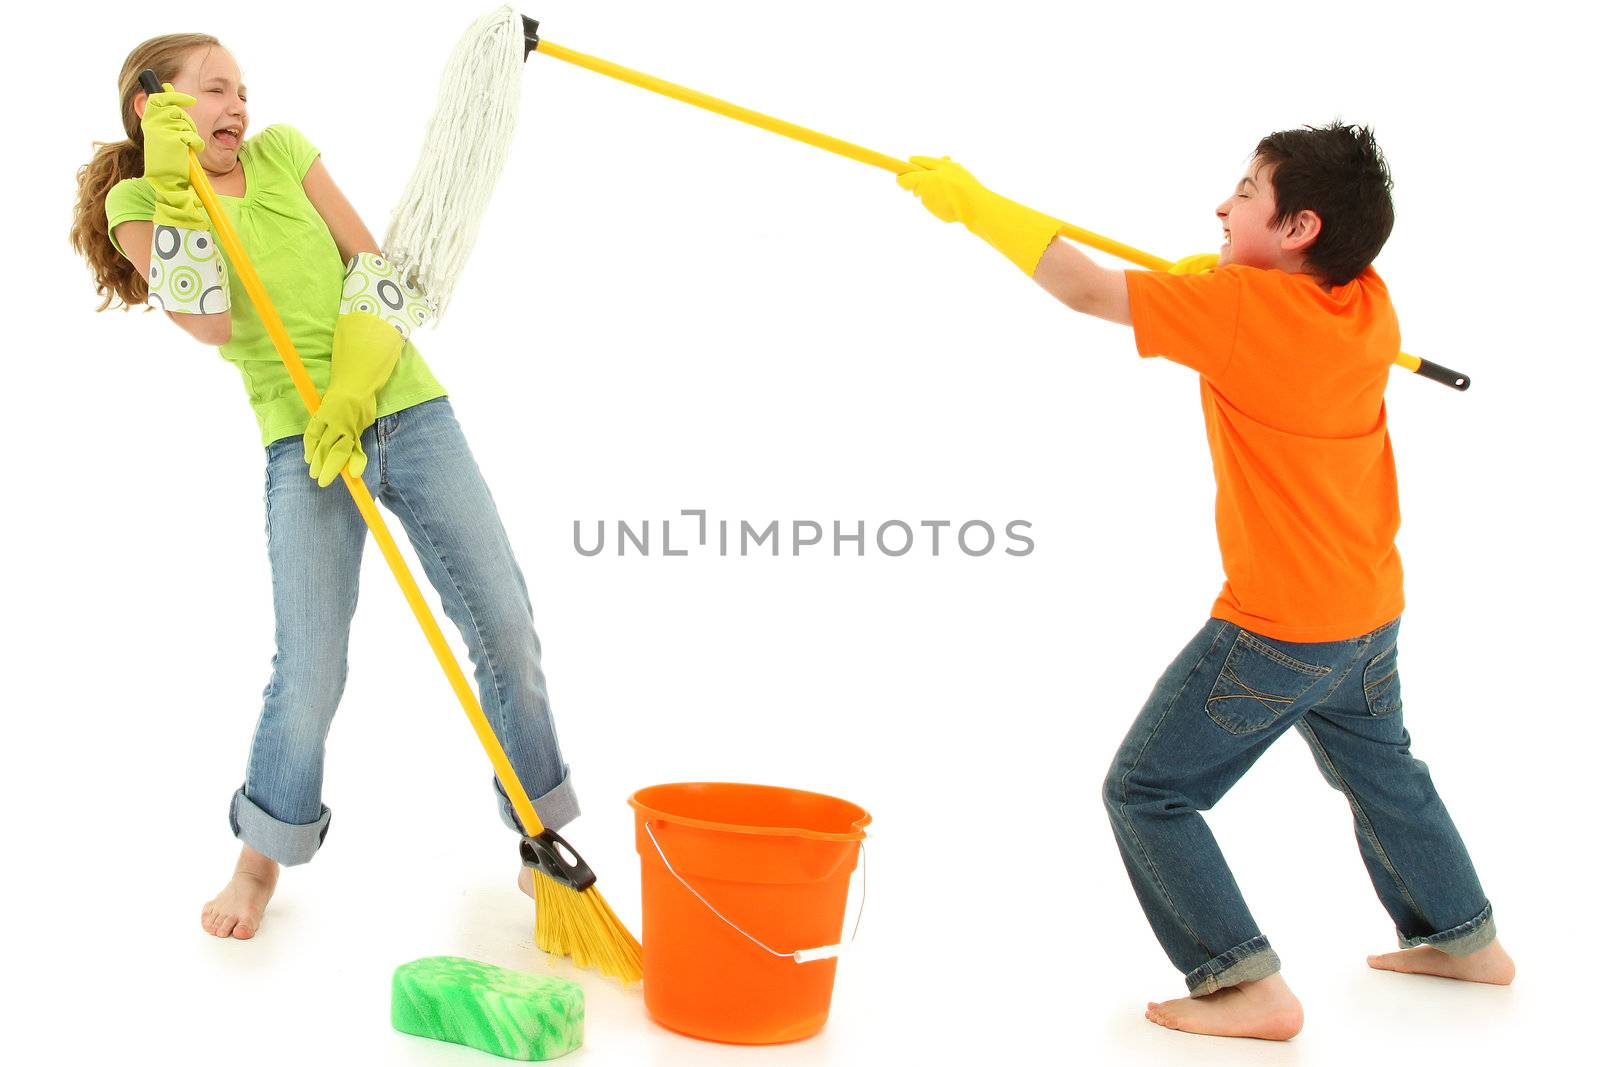 Spring cleaning 9 year old kids playing with stinky mop over white background barefoot in casual.